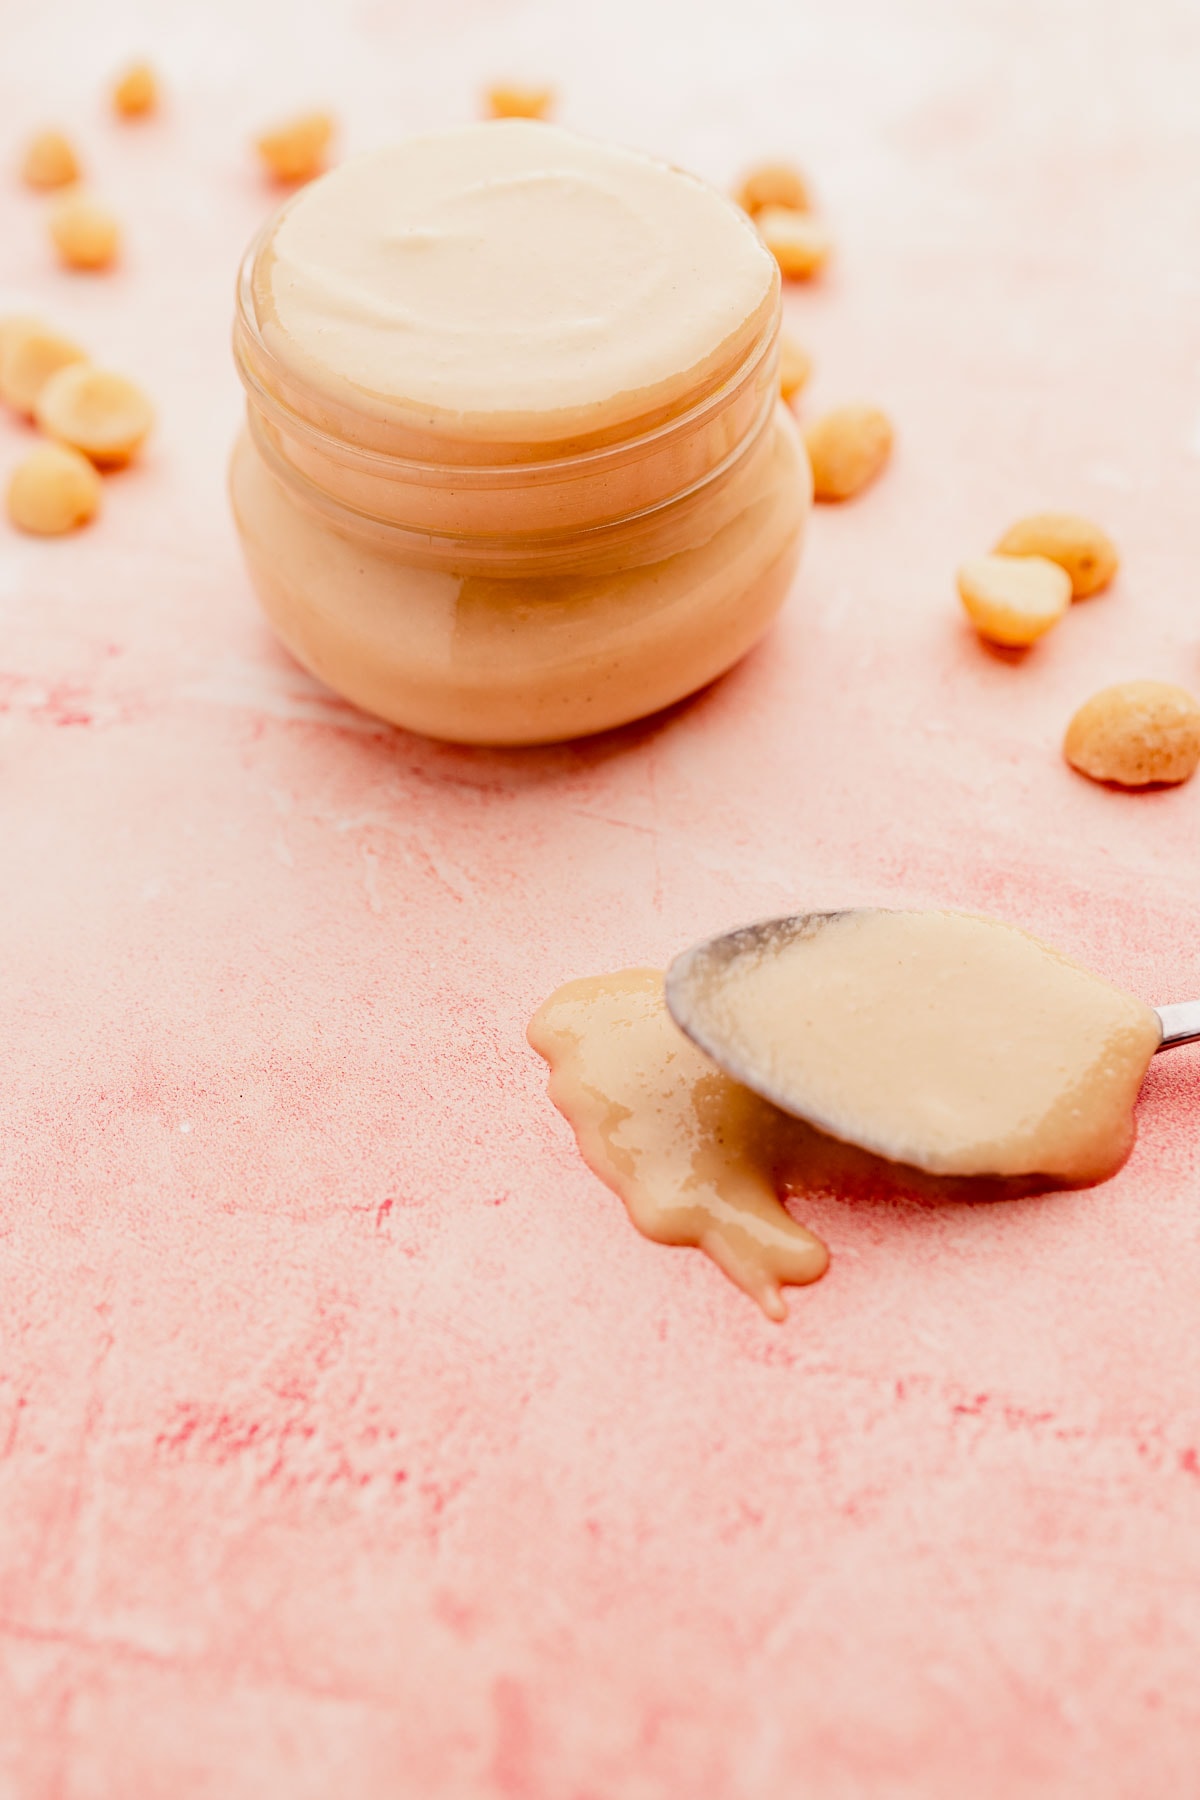 A jar of creamy macadamia nut butter with a spoon, some macadamia nut butter spilled on the tabletop, and scattered peanuts around, on a pink surface.